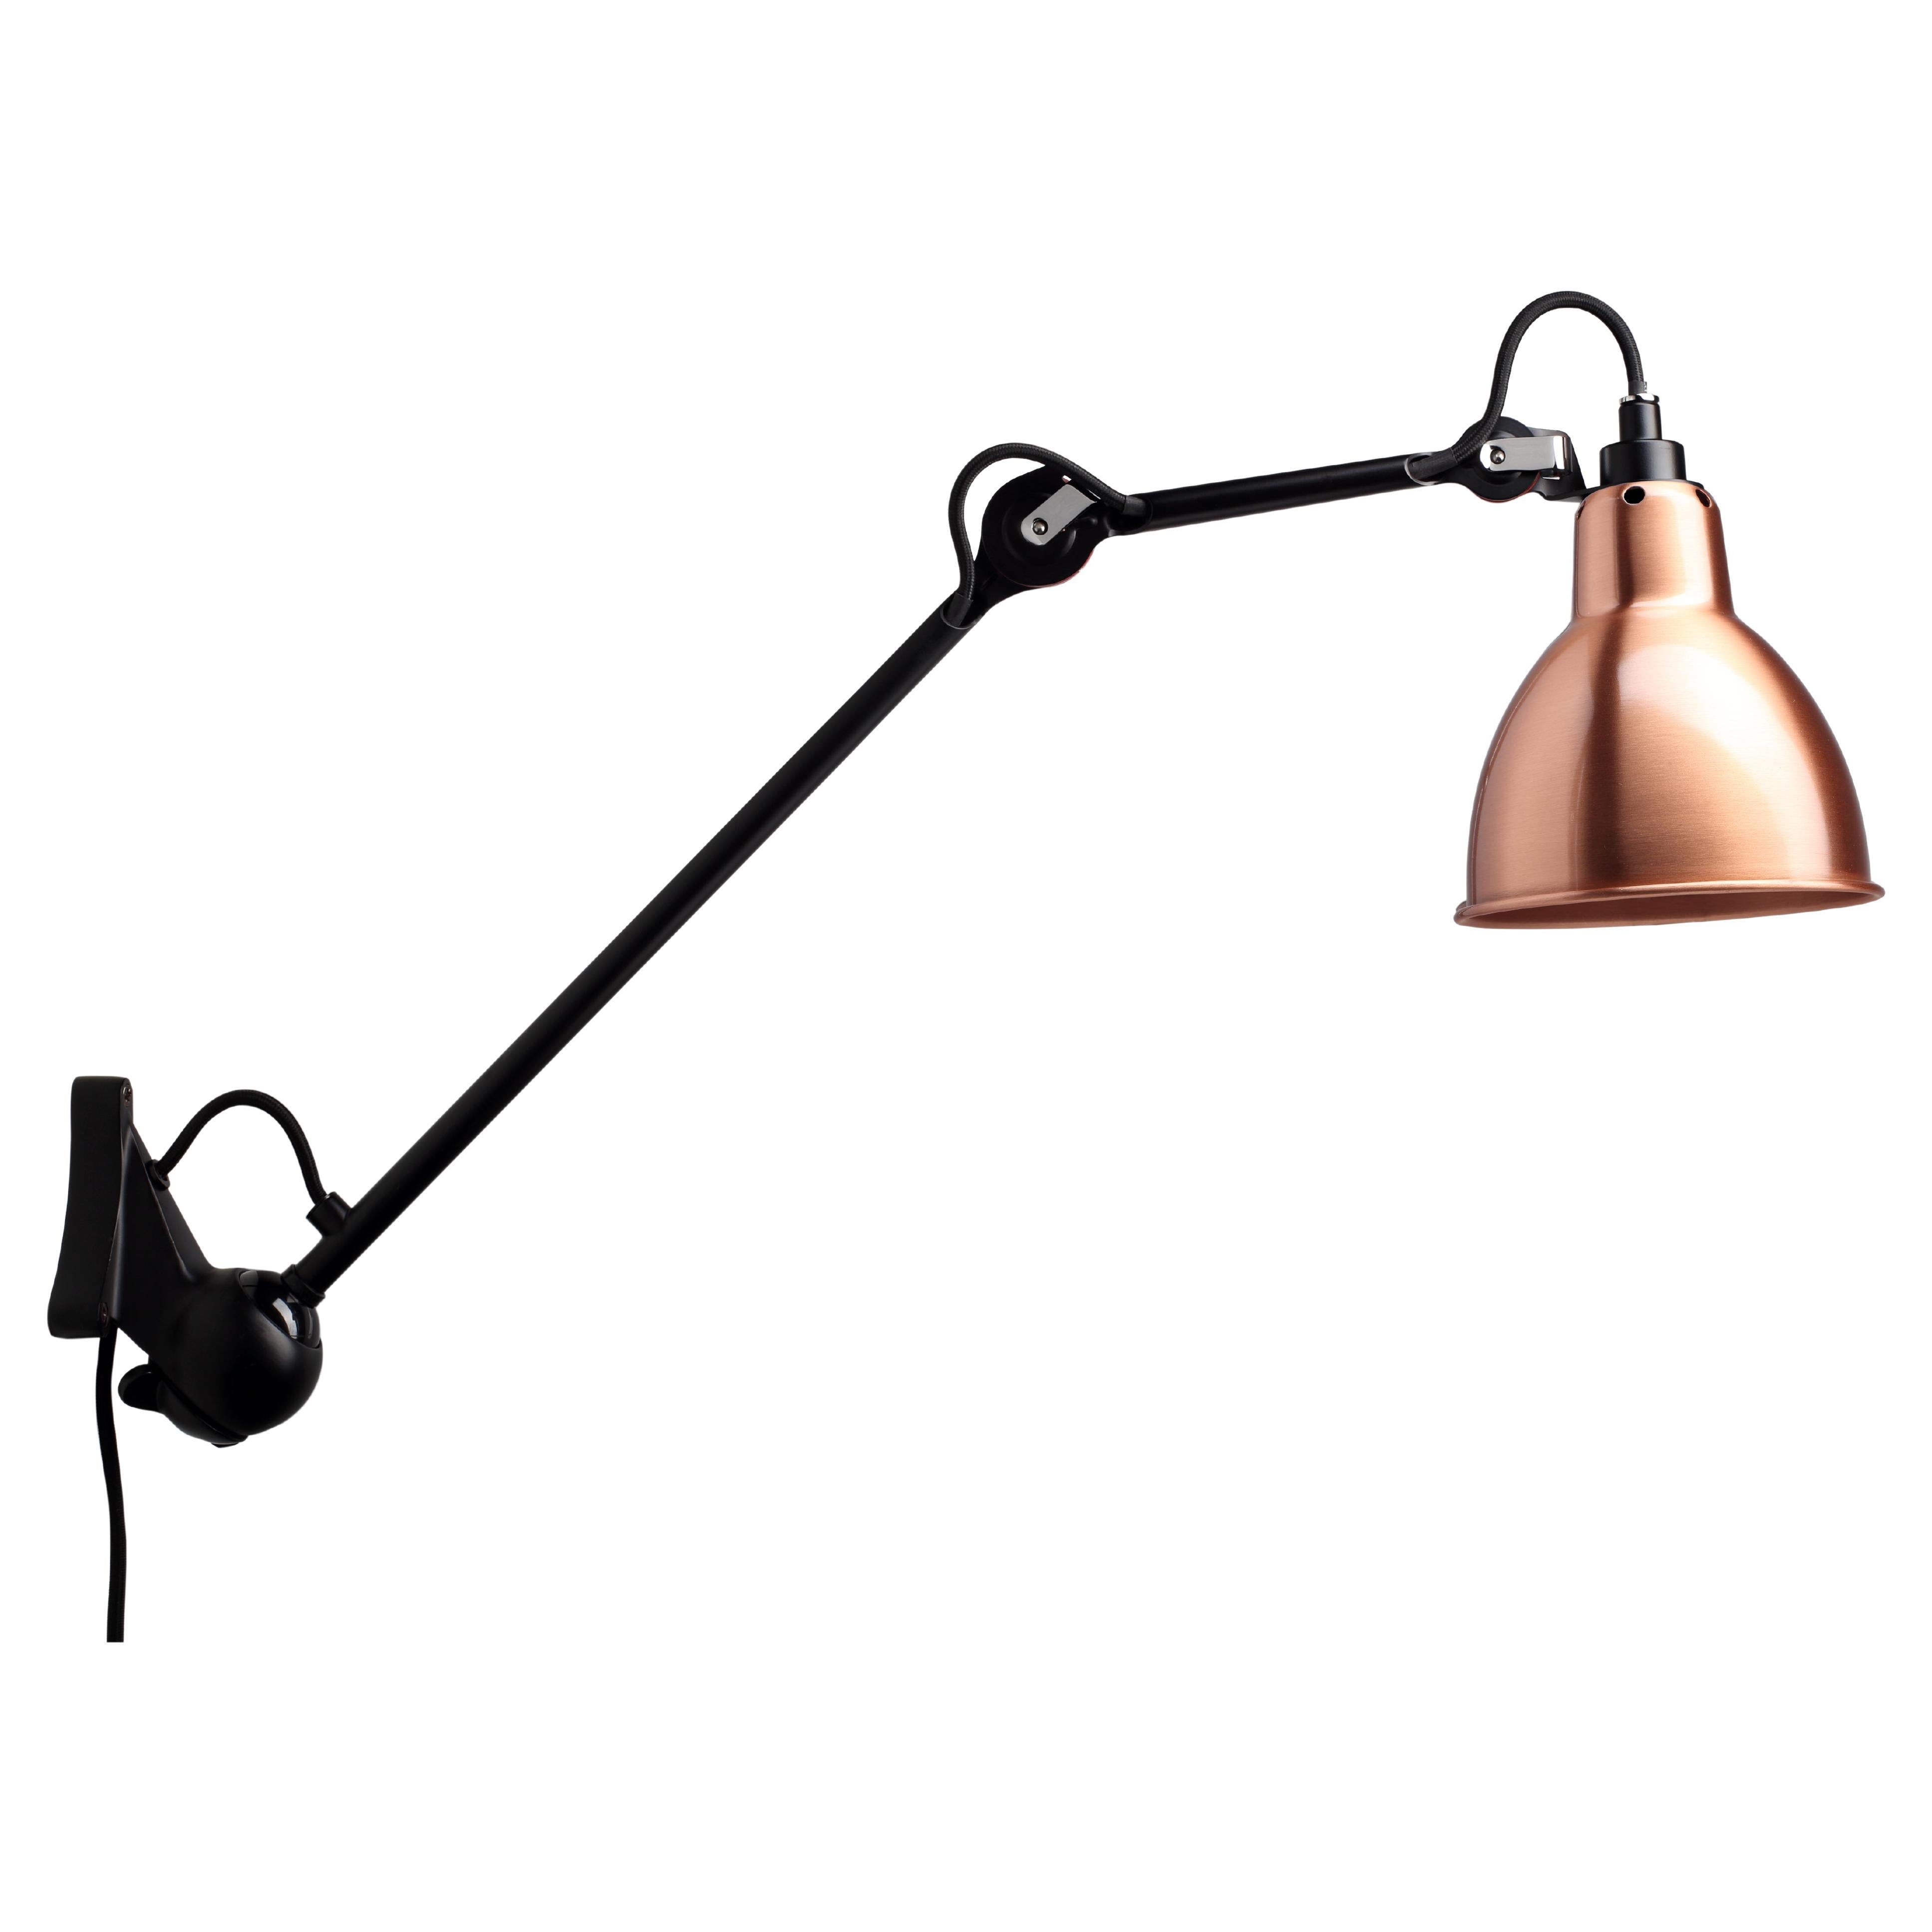 DCW Editions La Lampe Gras N°222 Wall Lamp in Black Arm and Copper Shade